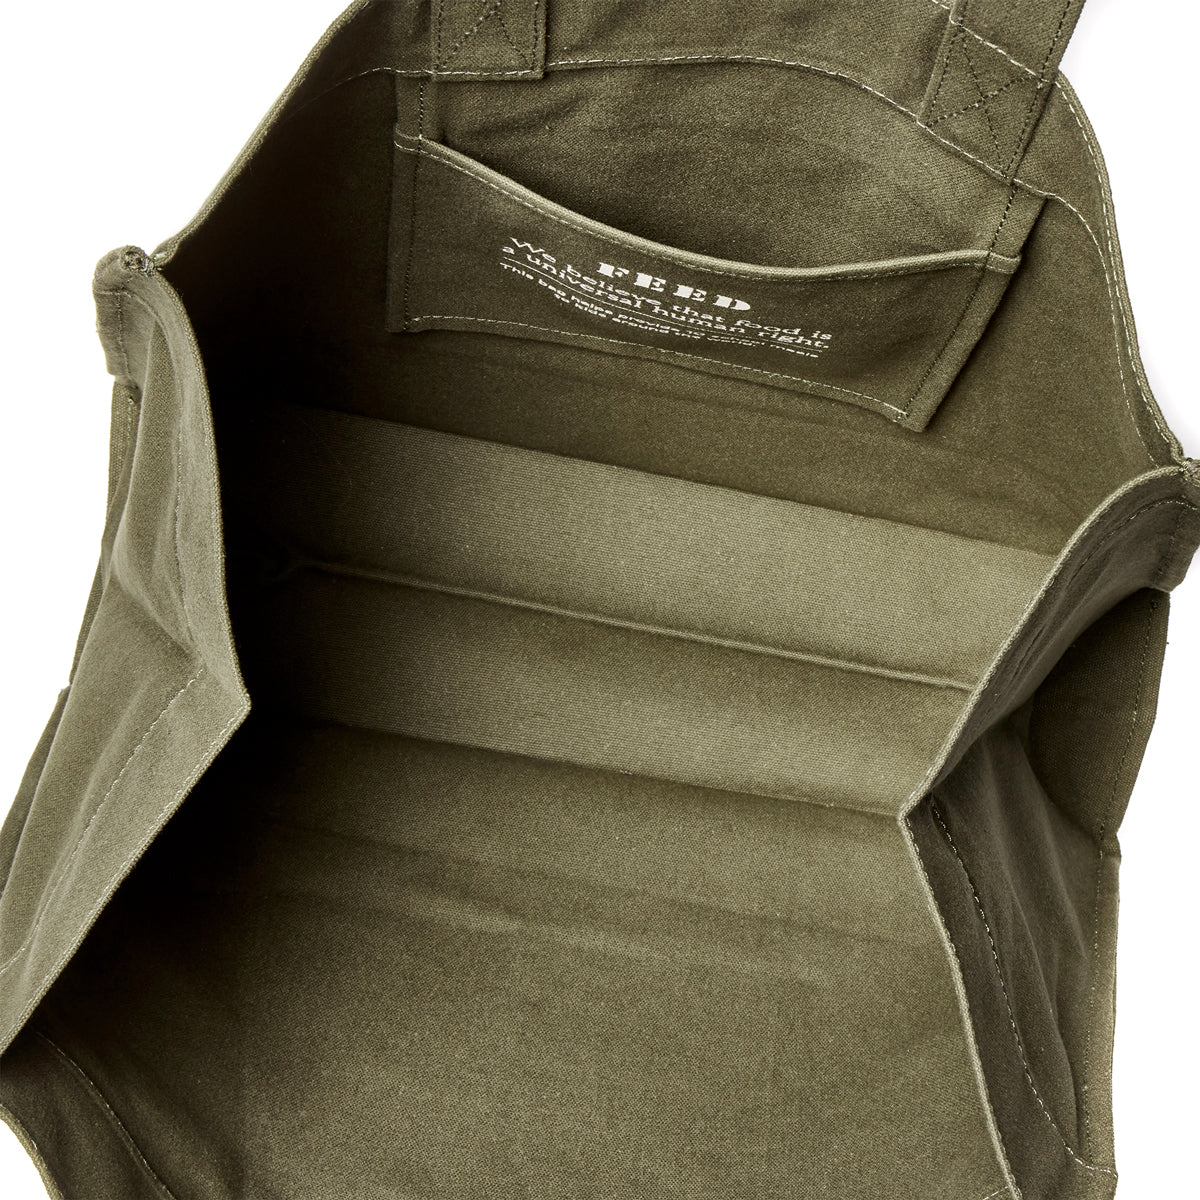 Army Green | Interior of army green Carryall